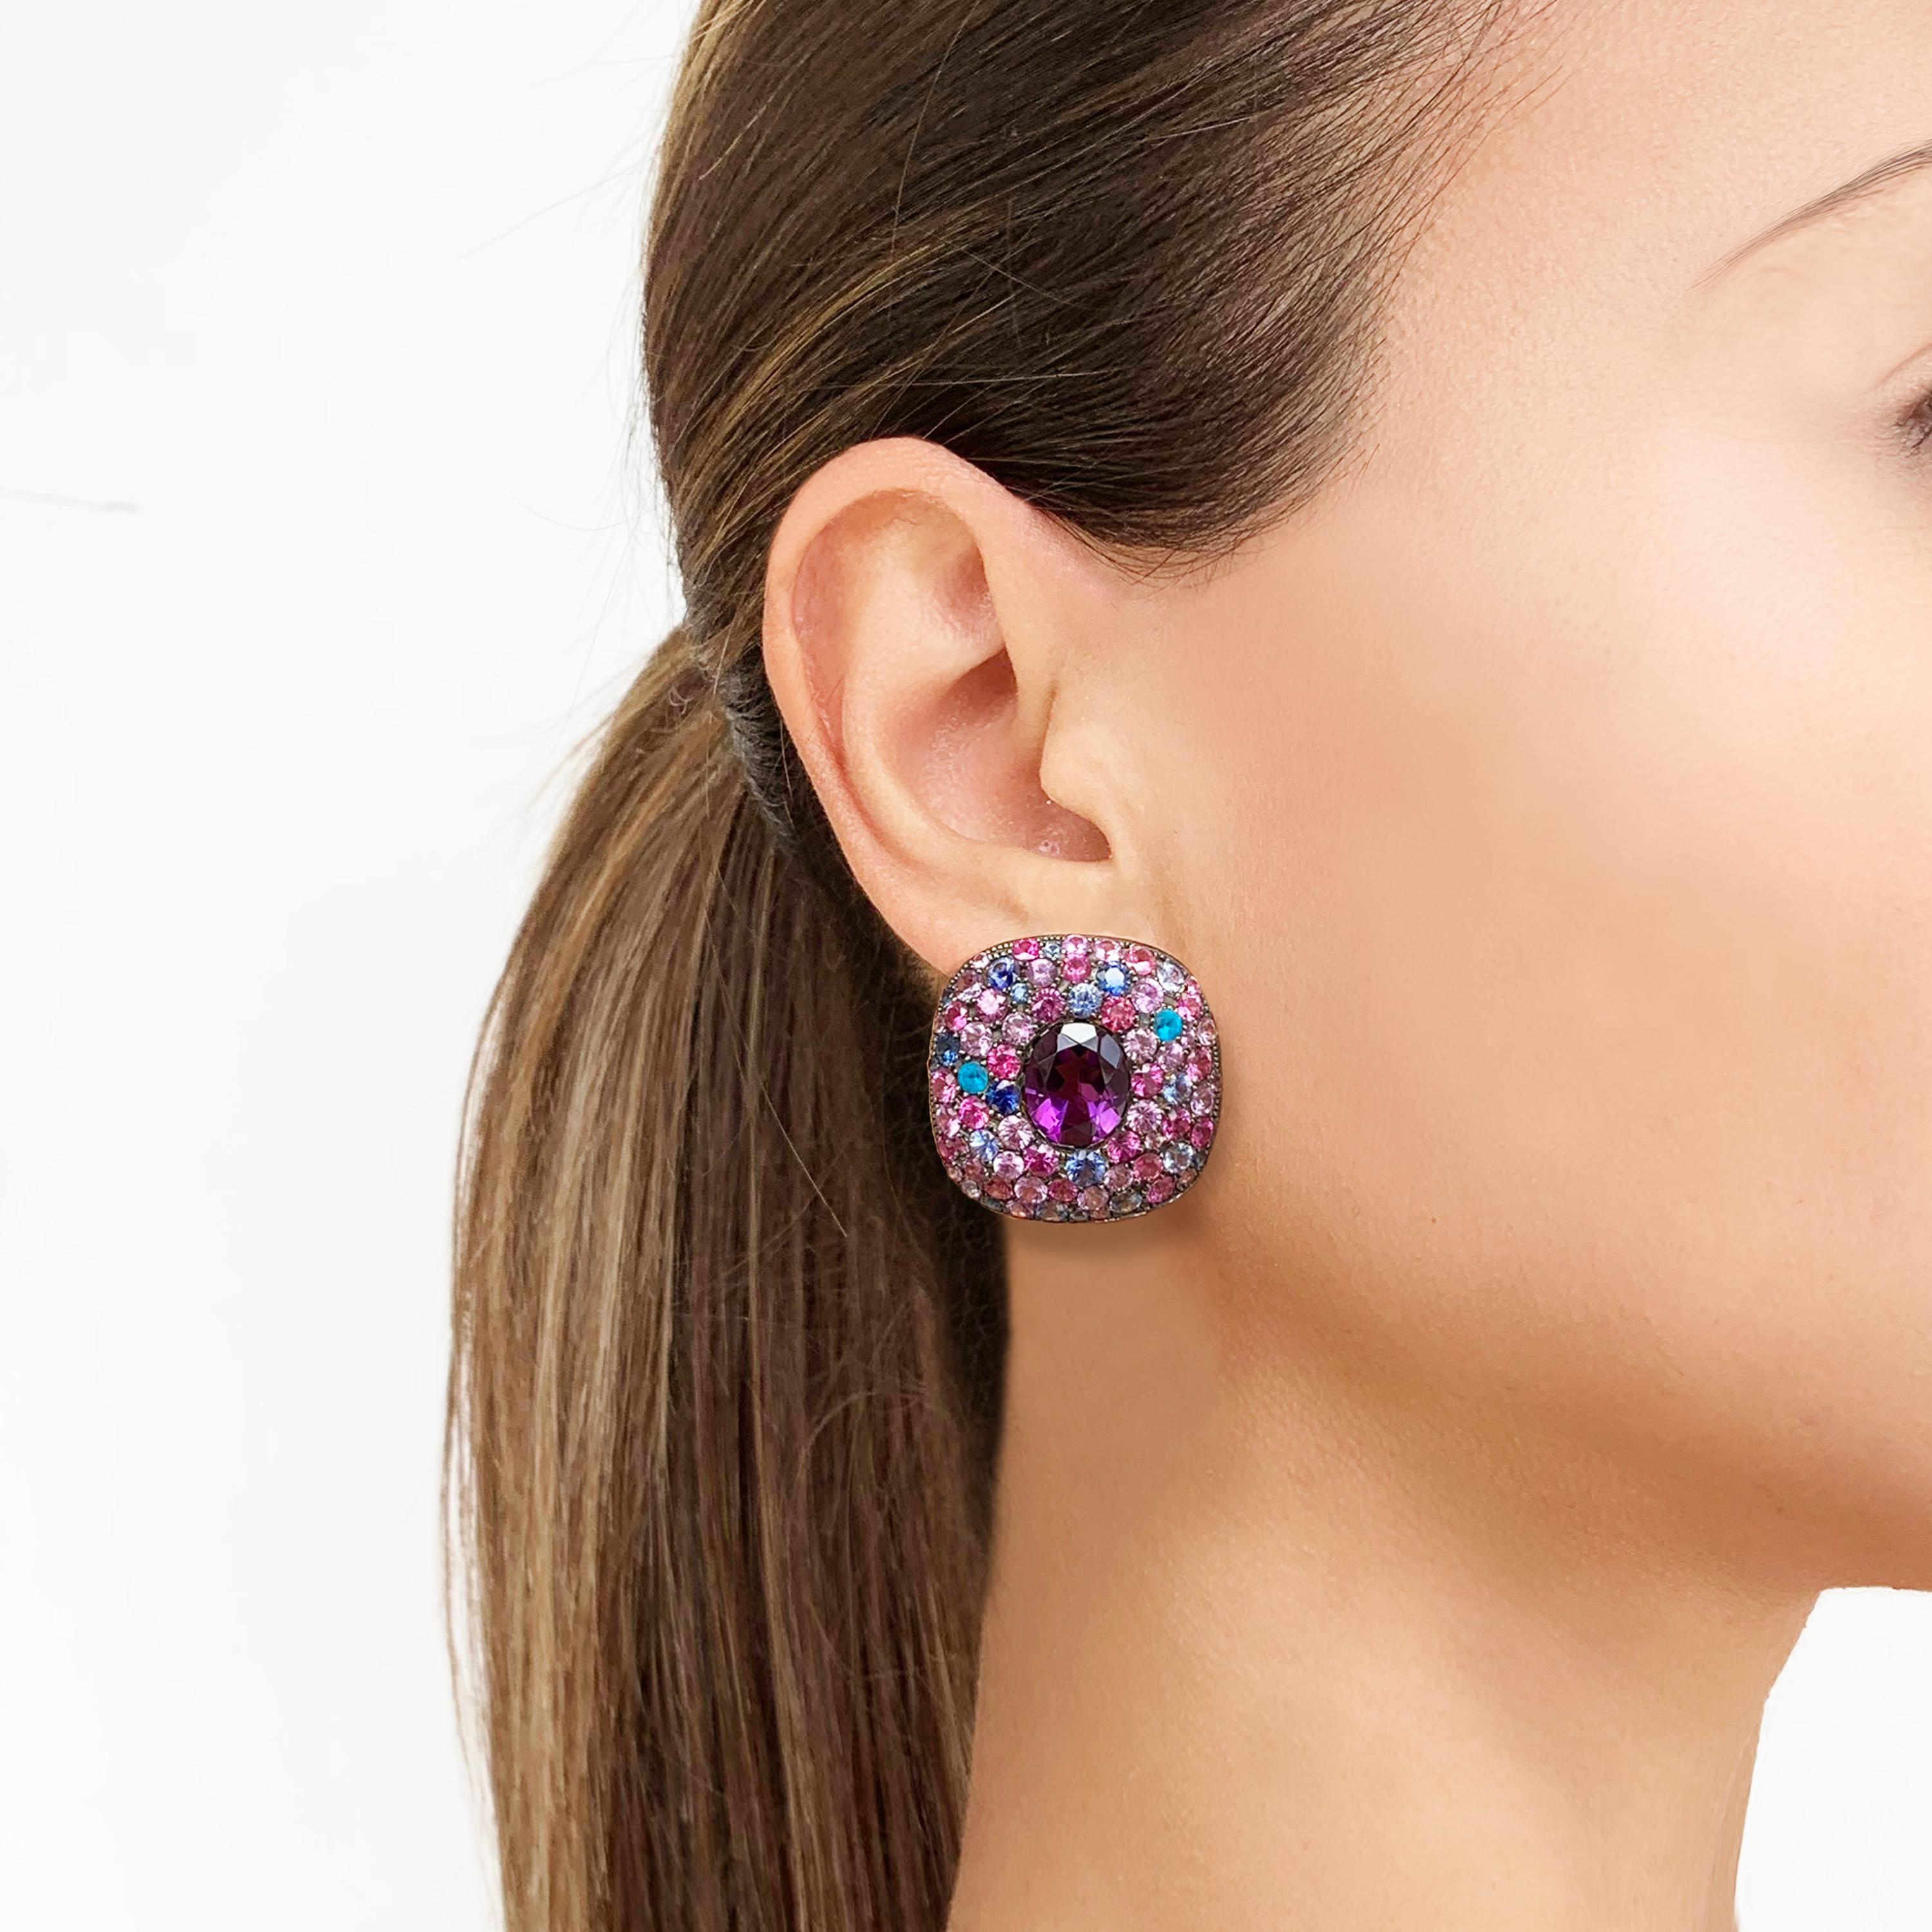 A Rosior by Manuel Rosas Contemporary Earclips in 19,2k Yellow Gold setted with:
- 2 Oval Cut Amethysts with 8,17 ct, 
- 4 Apatites with 0,48 ct, 
- 64 Pink Sapphires with 9,96 ct, 
- 40 Blue Sapphires with 5,22 ct
- 41 Purple Sapphires with 5,64